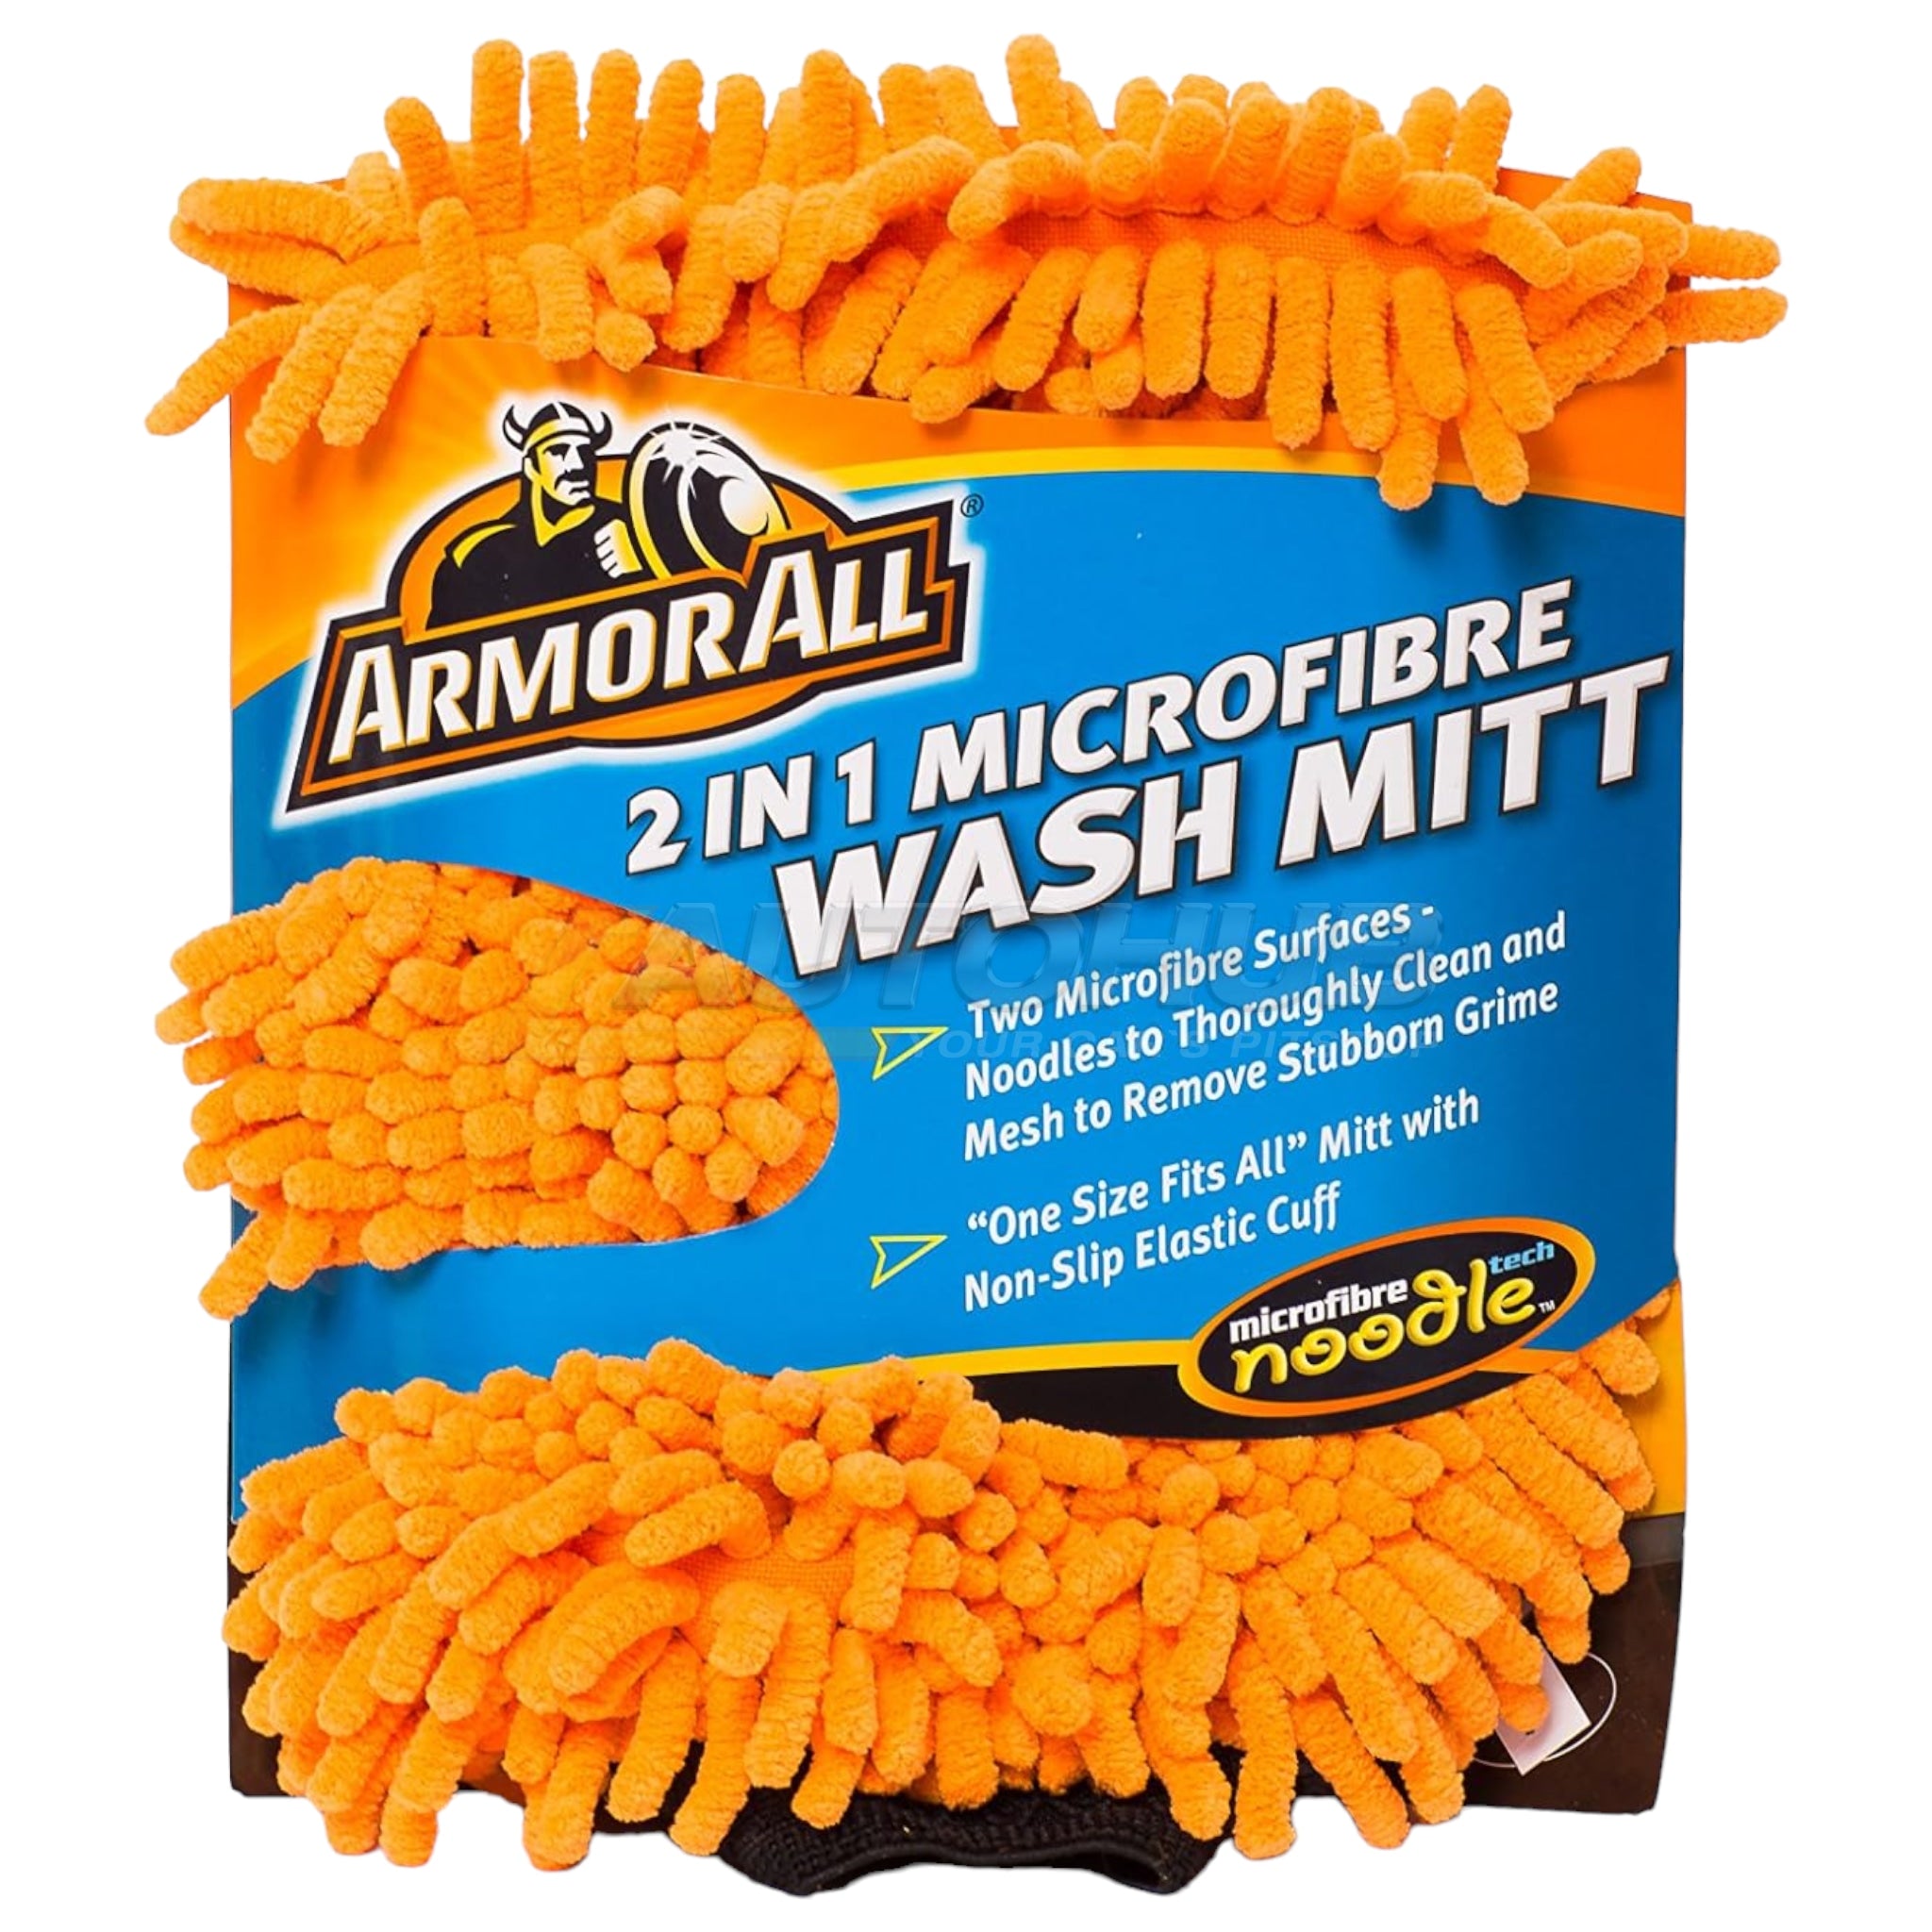 Armor All Wash Mitt (2 in 1 Microfiber Noodle)